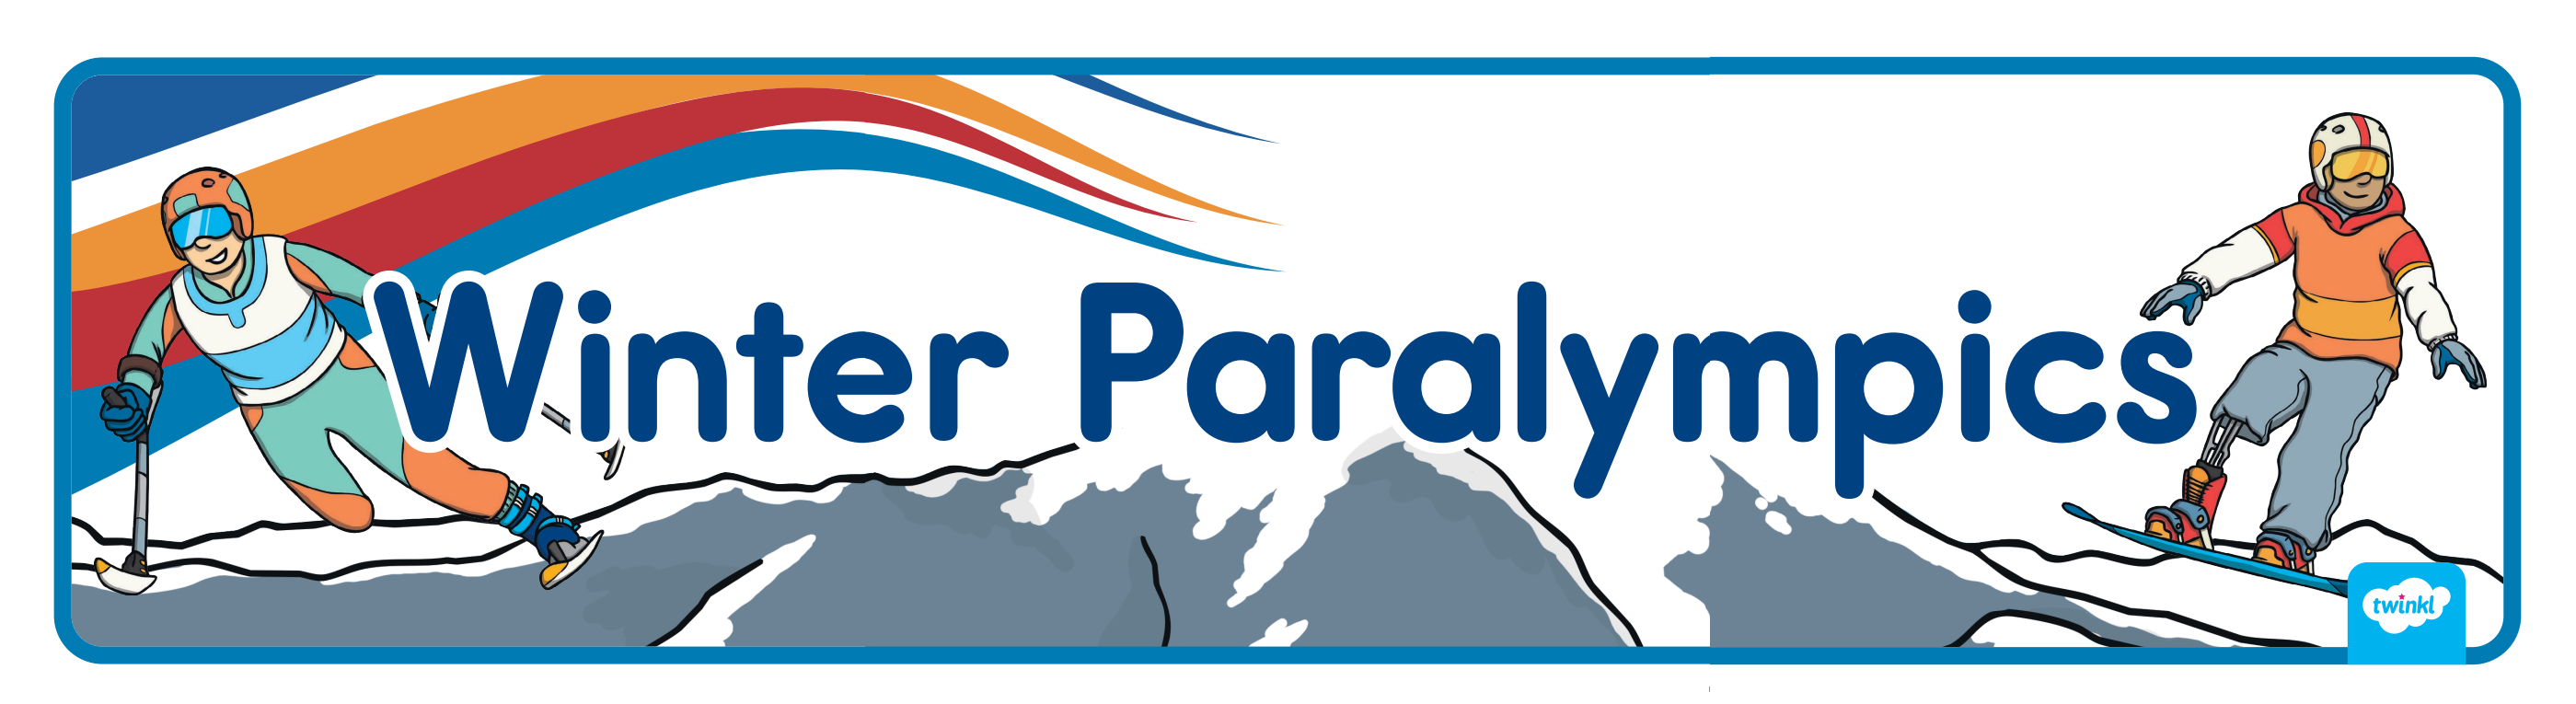 What are the Winter Paralympics? Twinkl Teaching Resources